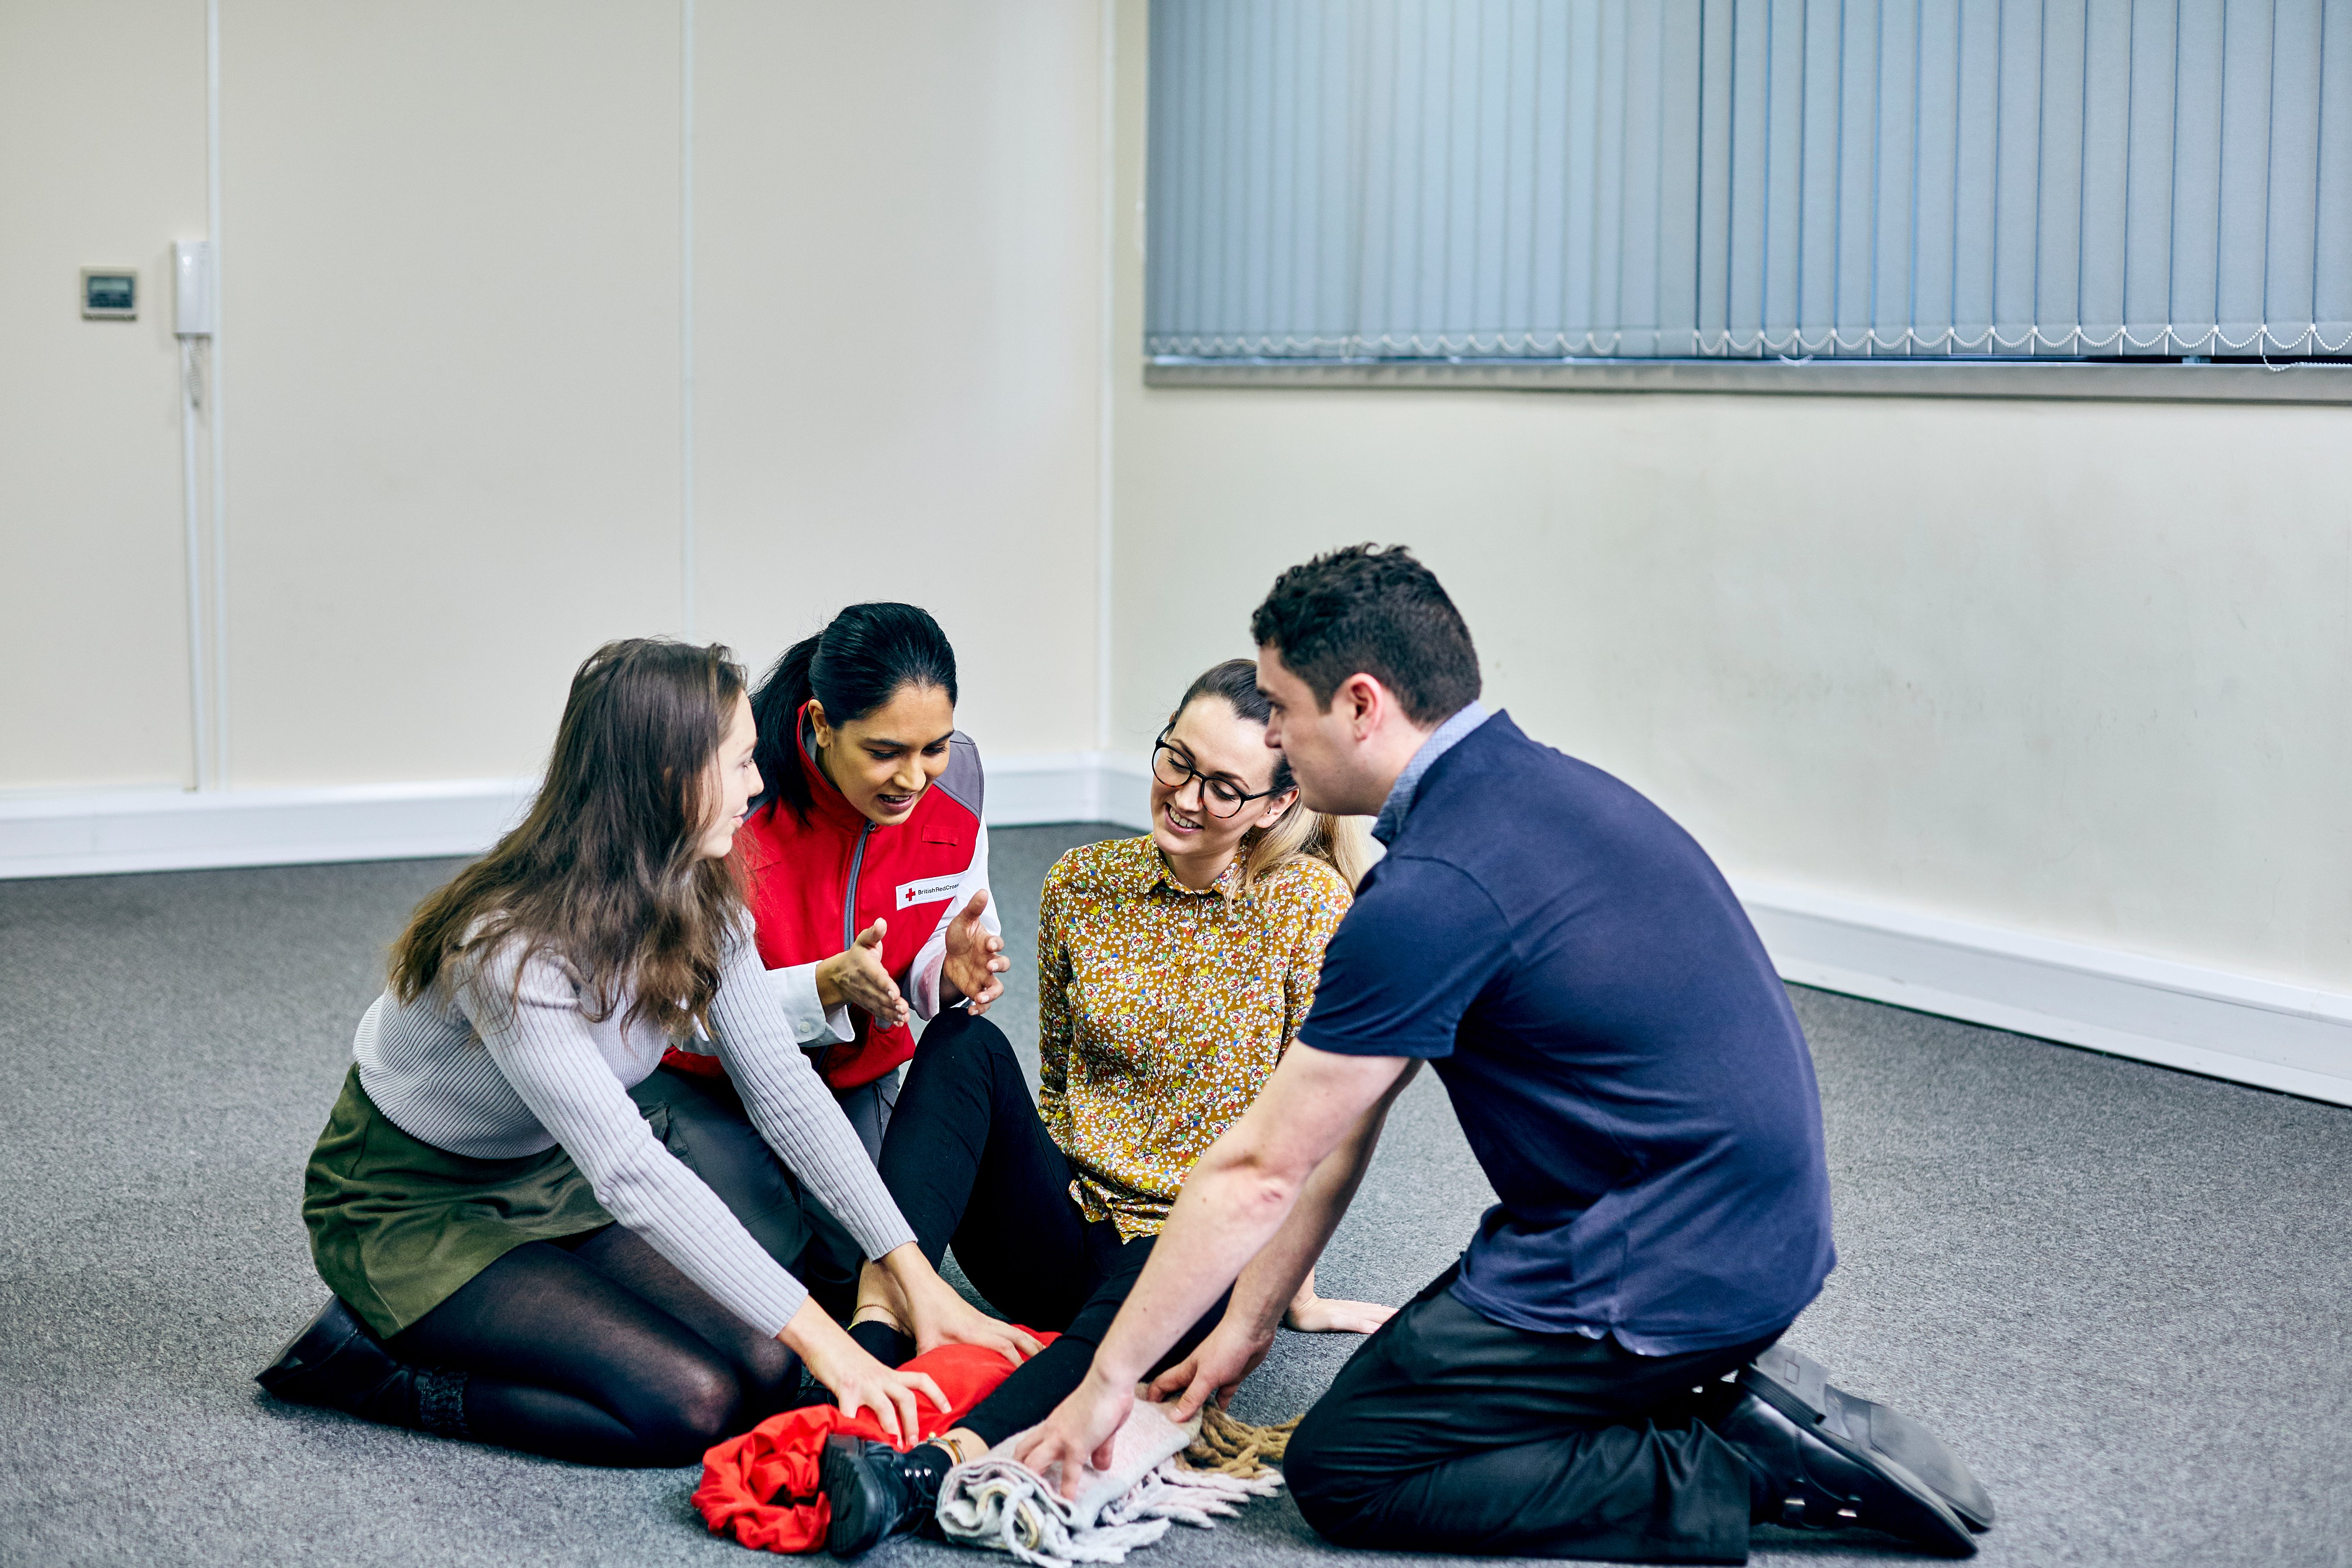 A British Red Cross trainer teaching a group how to react to someone with a knee injury